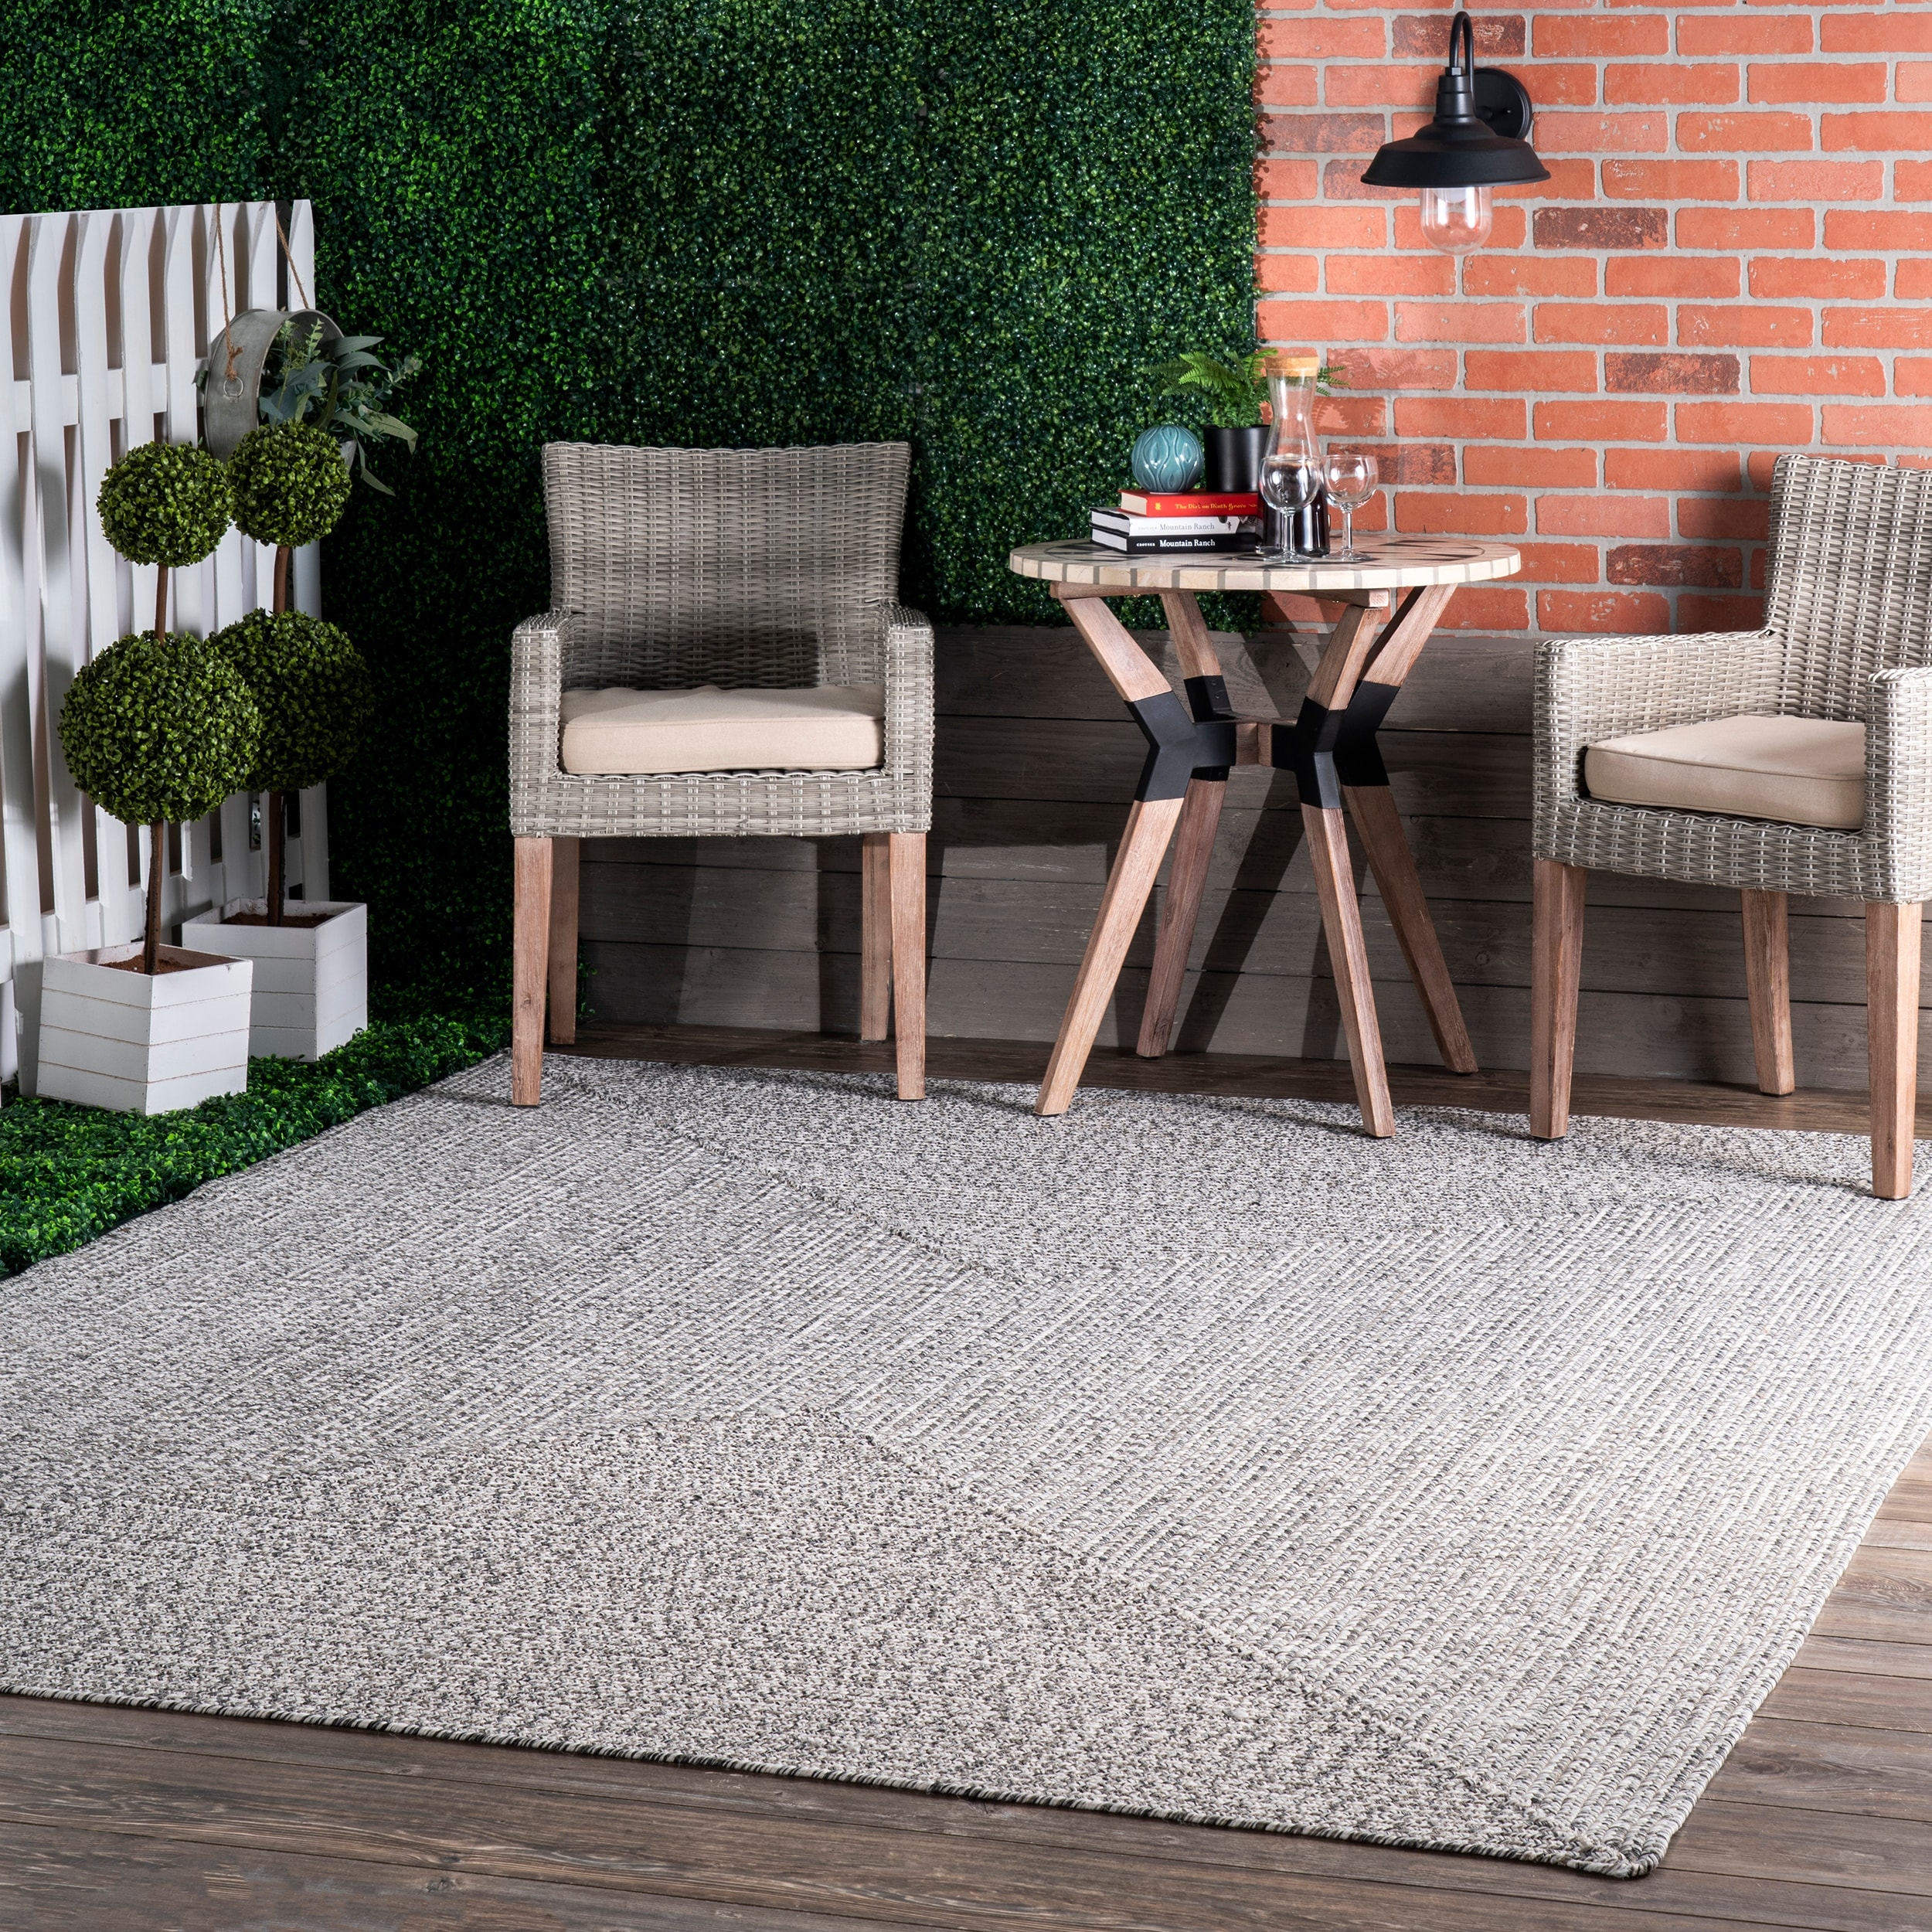 https://ak1.ostkcdn.com/images/products/is/images/direct/94e1e1c2622e0b7eb645e516aac65e2c0e5cb51a/Brooklyn-Rug-Co-Casey-Casual-Indoor-Outdoor-Area-Rug.jpg